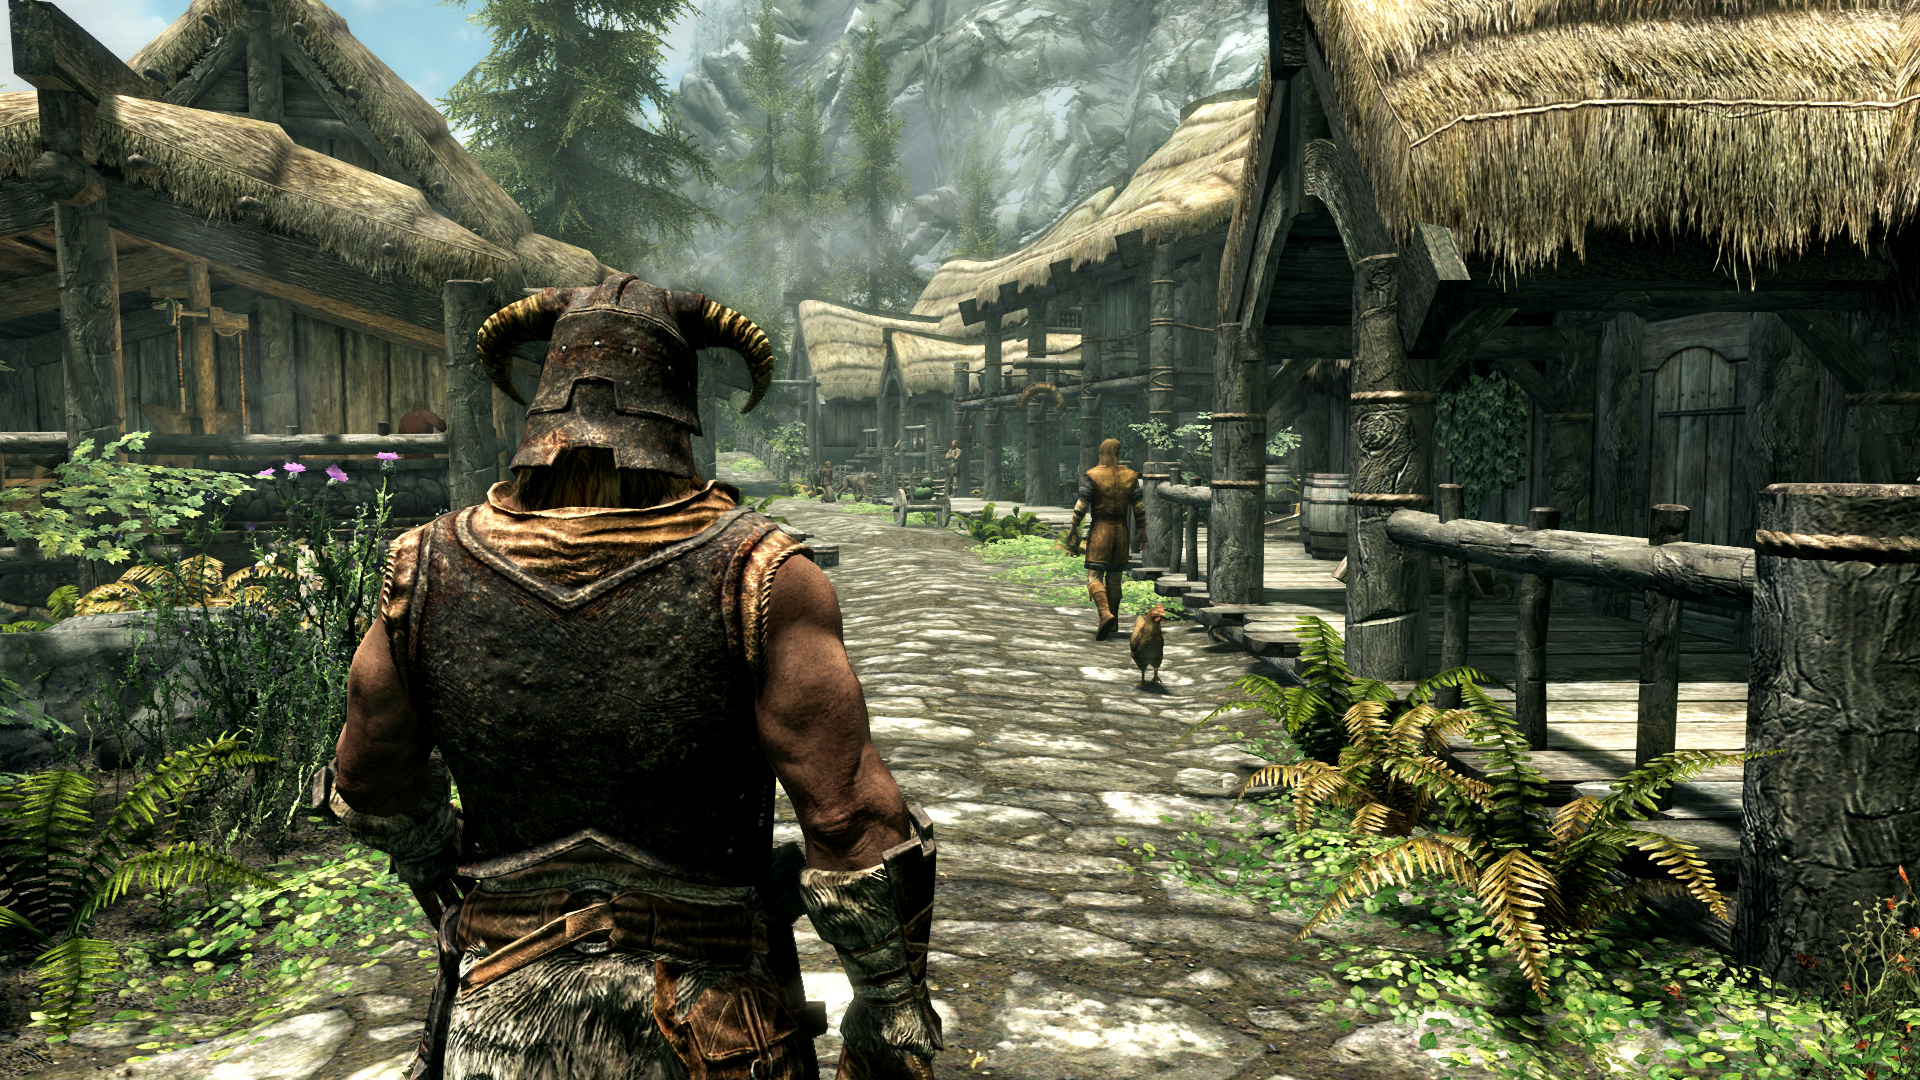 The Dragonborn from Skyrim walking through a humble village in sunlight.